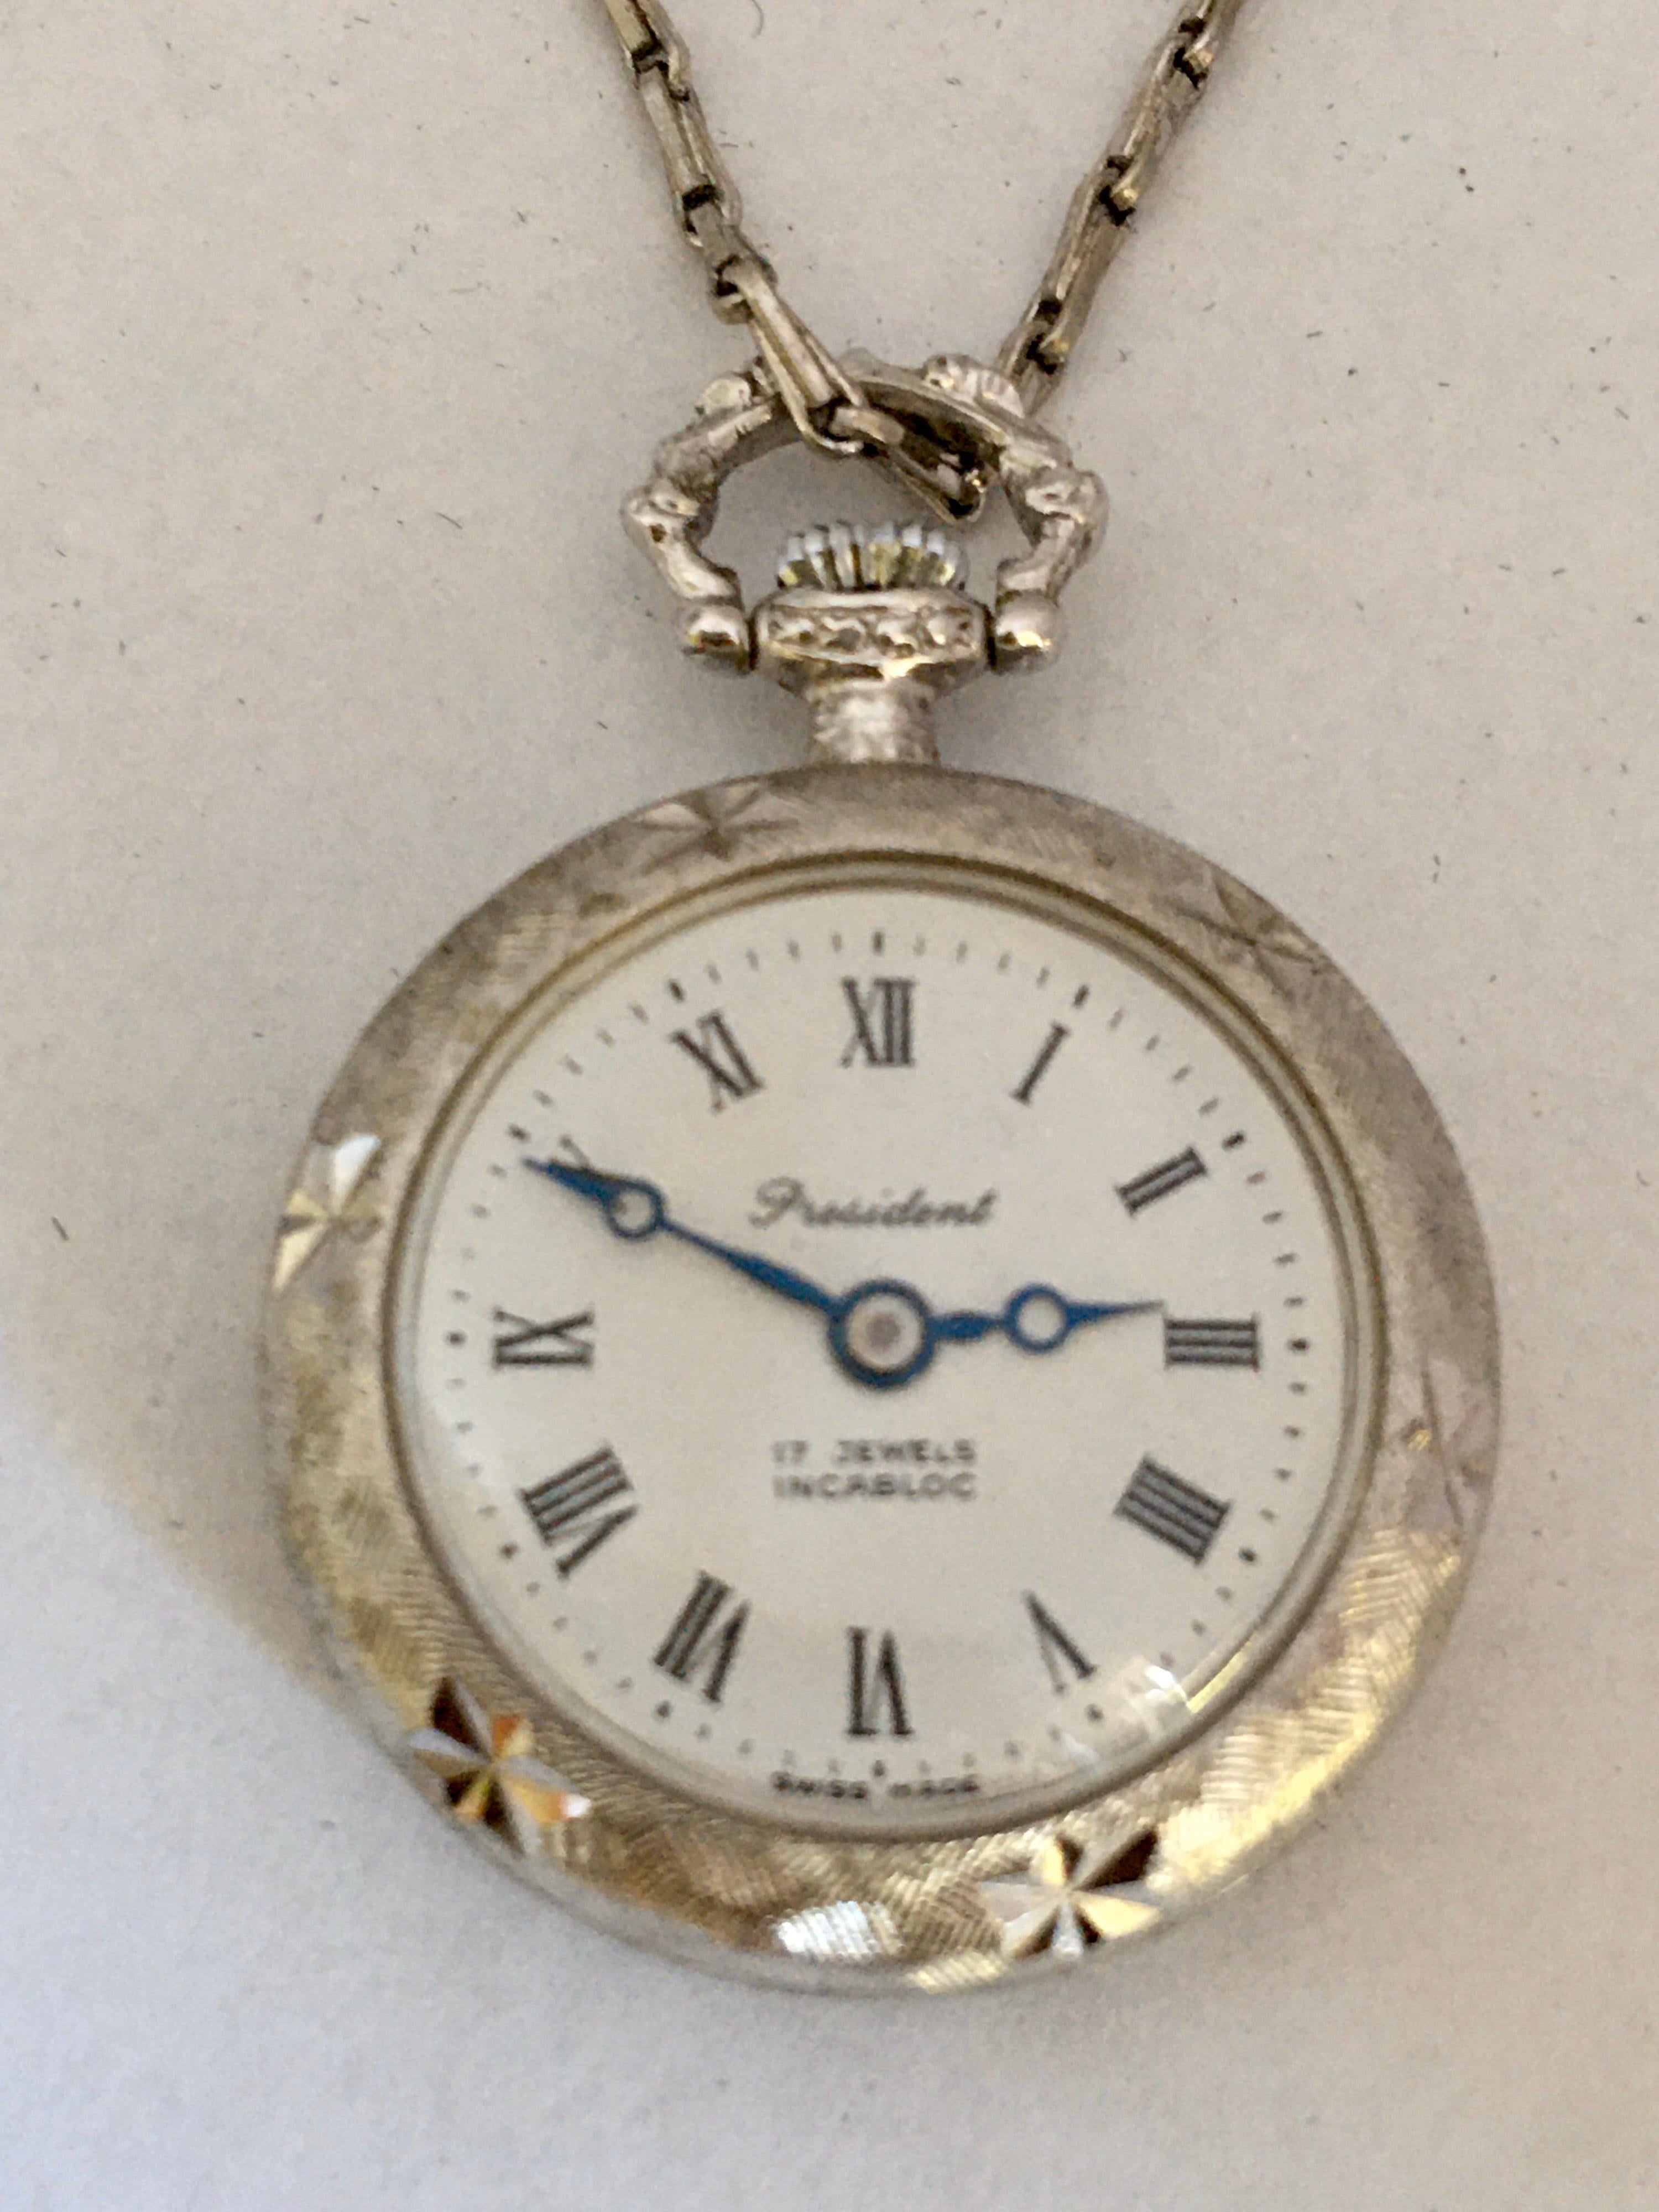 Vintage 1960s Hand-Winding Silver Plated Engraved Pendant Watch 4